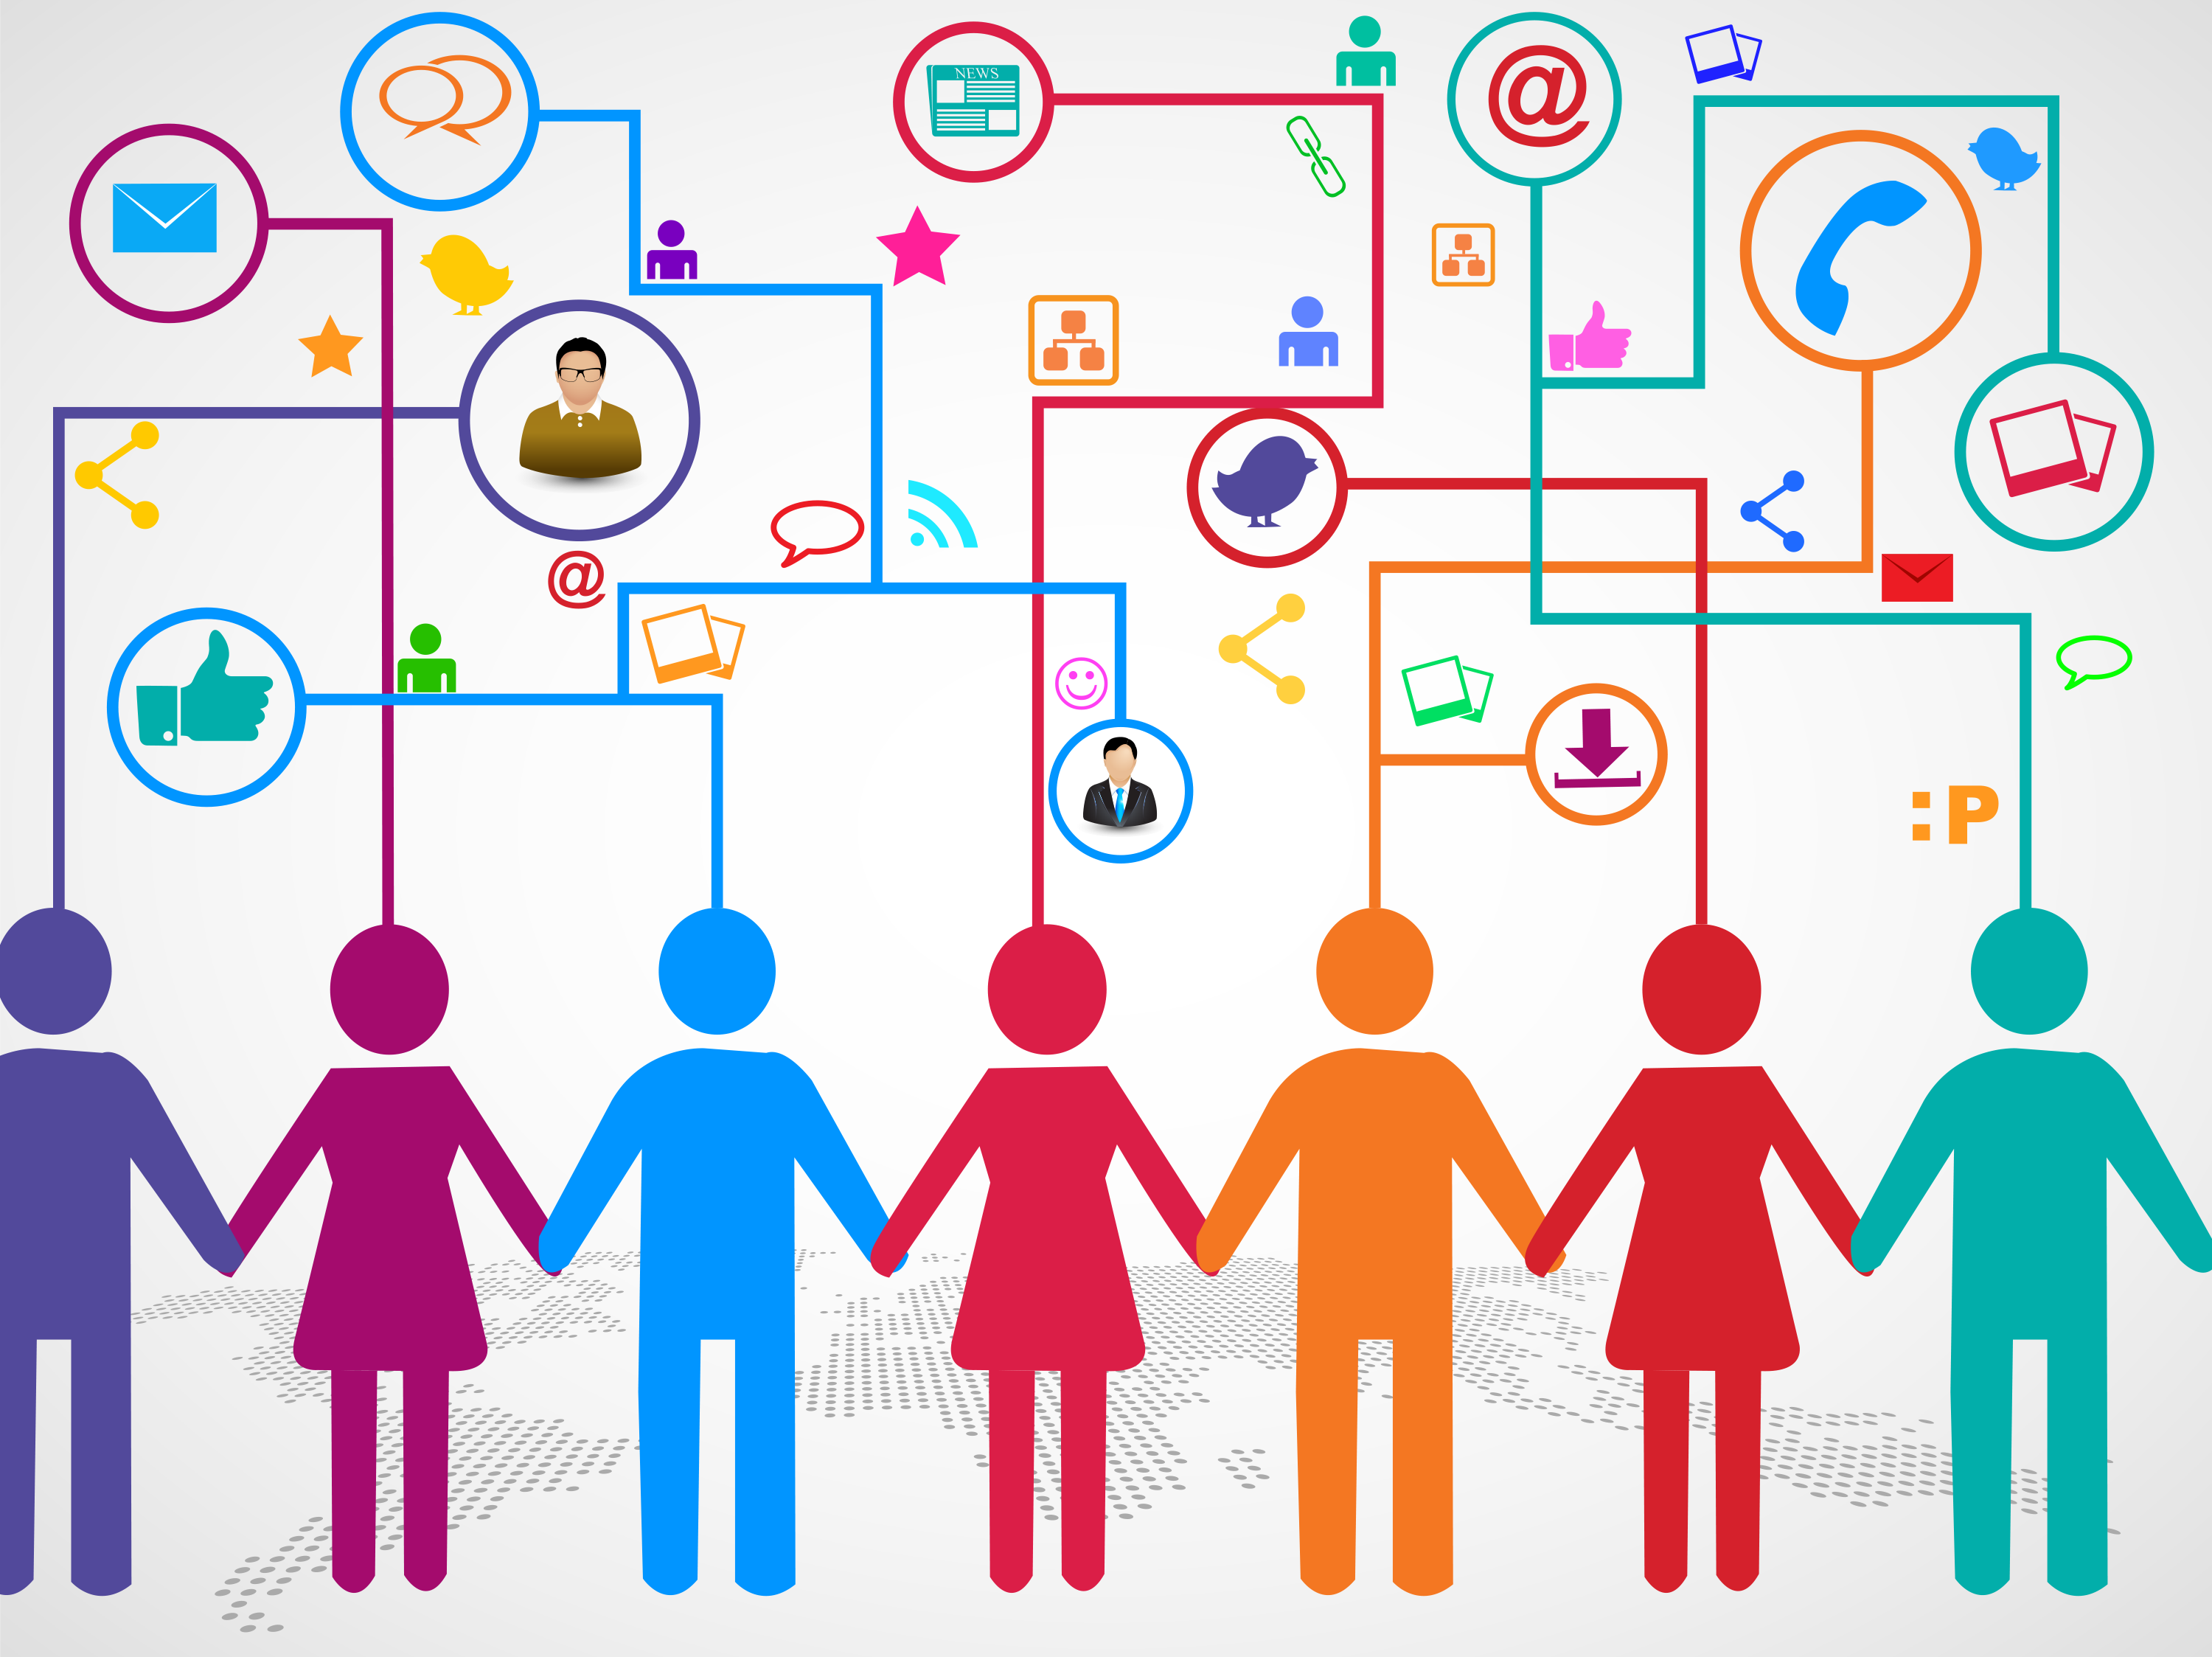 People connected by multiple forms of digital media and communication